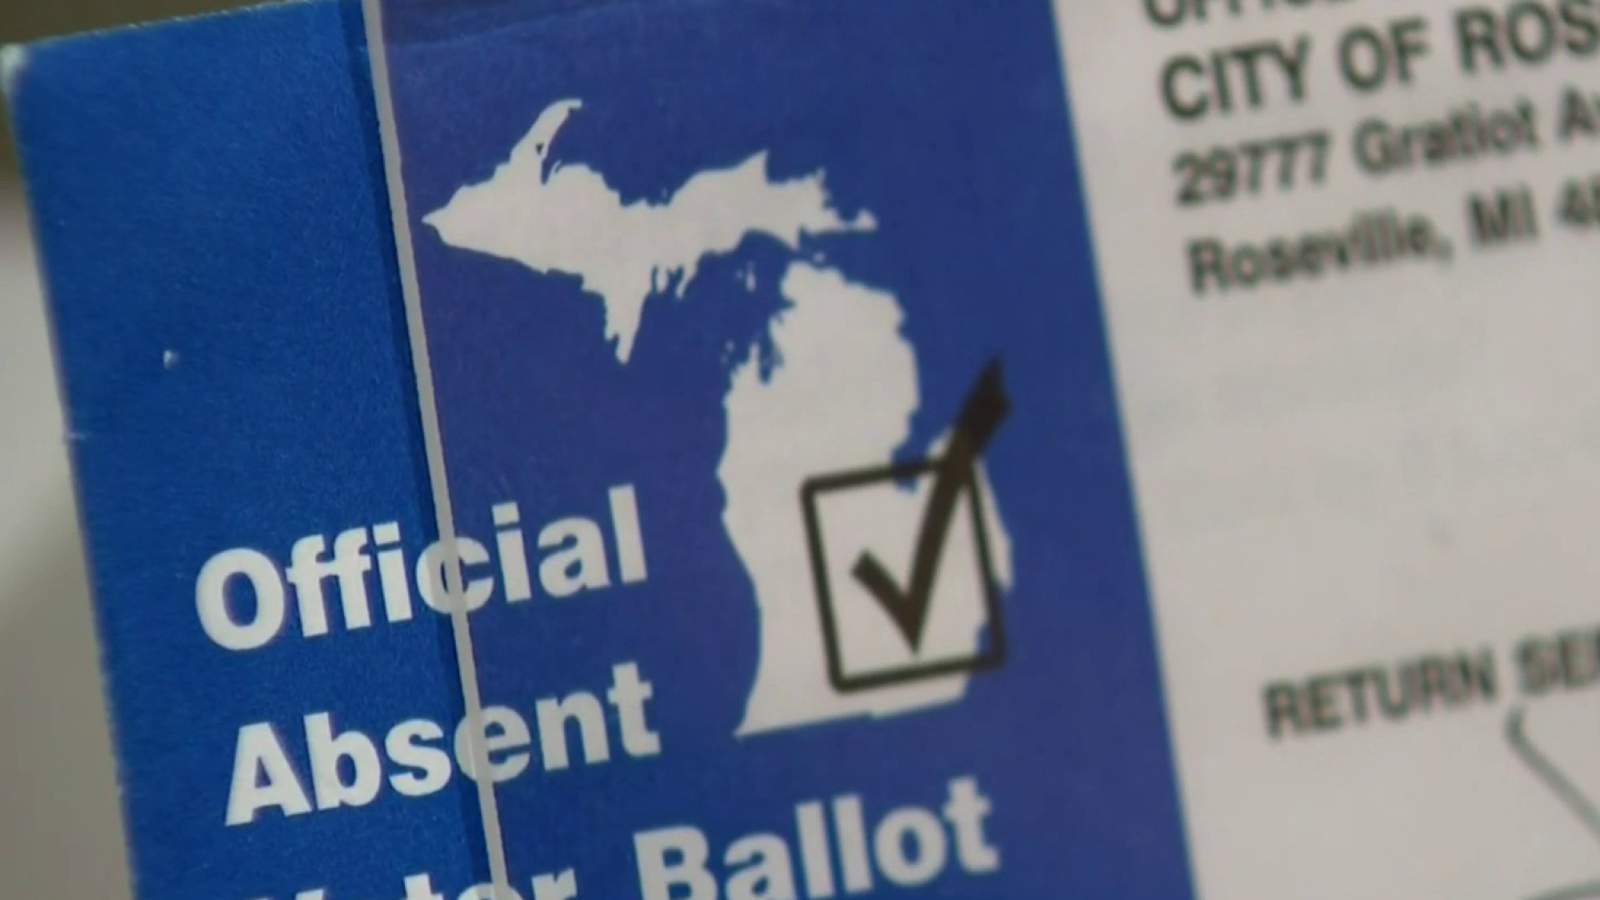 Fact-check: Michigan is not sending absentee ballots to every registered voter